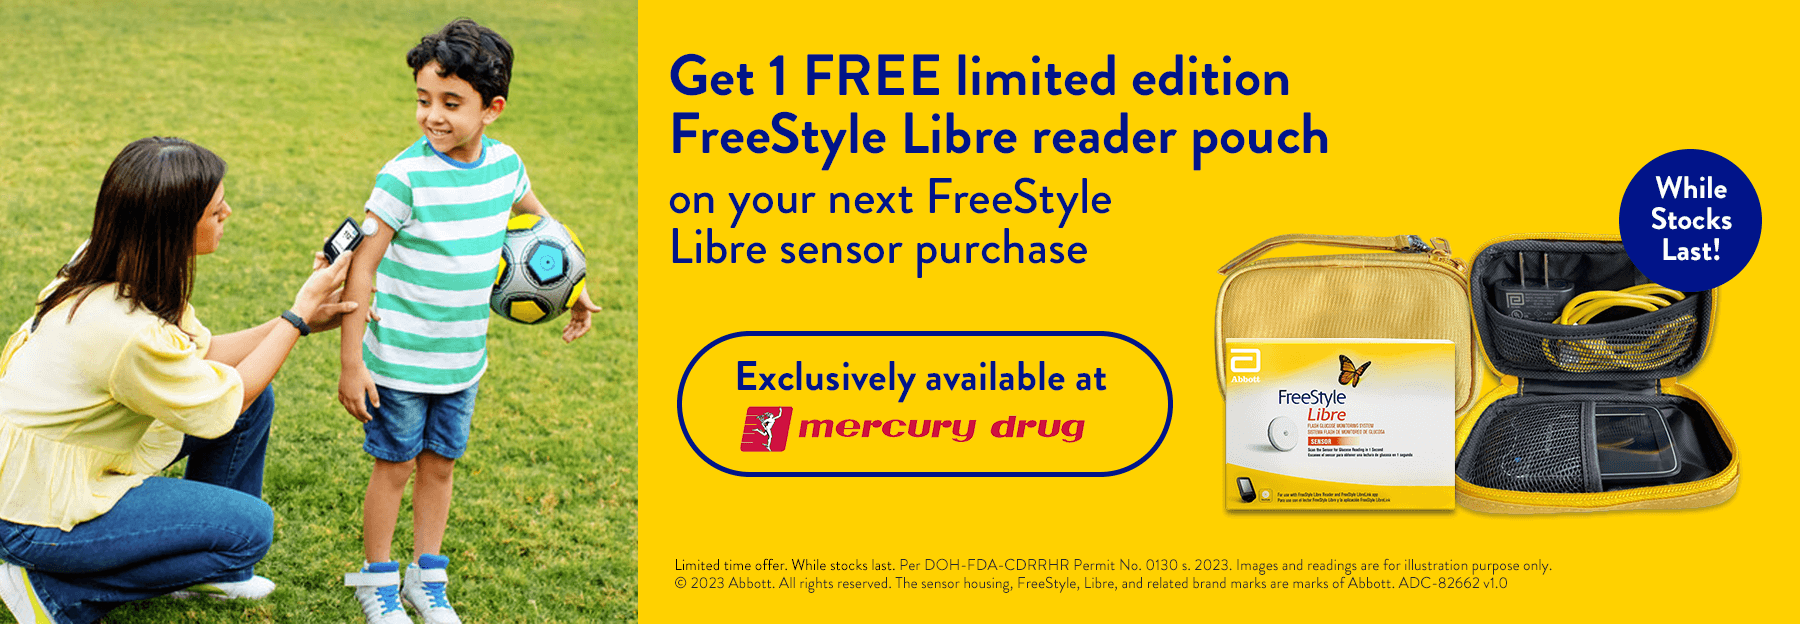 Get 1 FREE limited edition FreeStyle Libre reader pouch